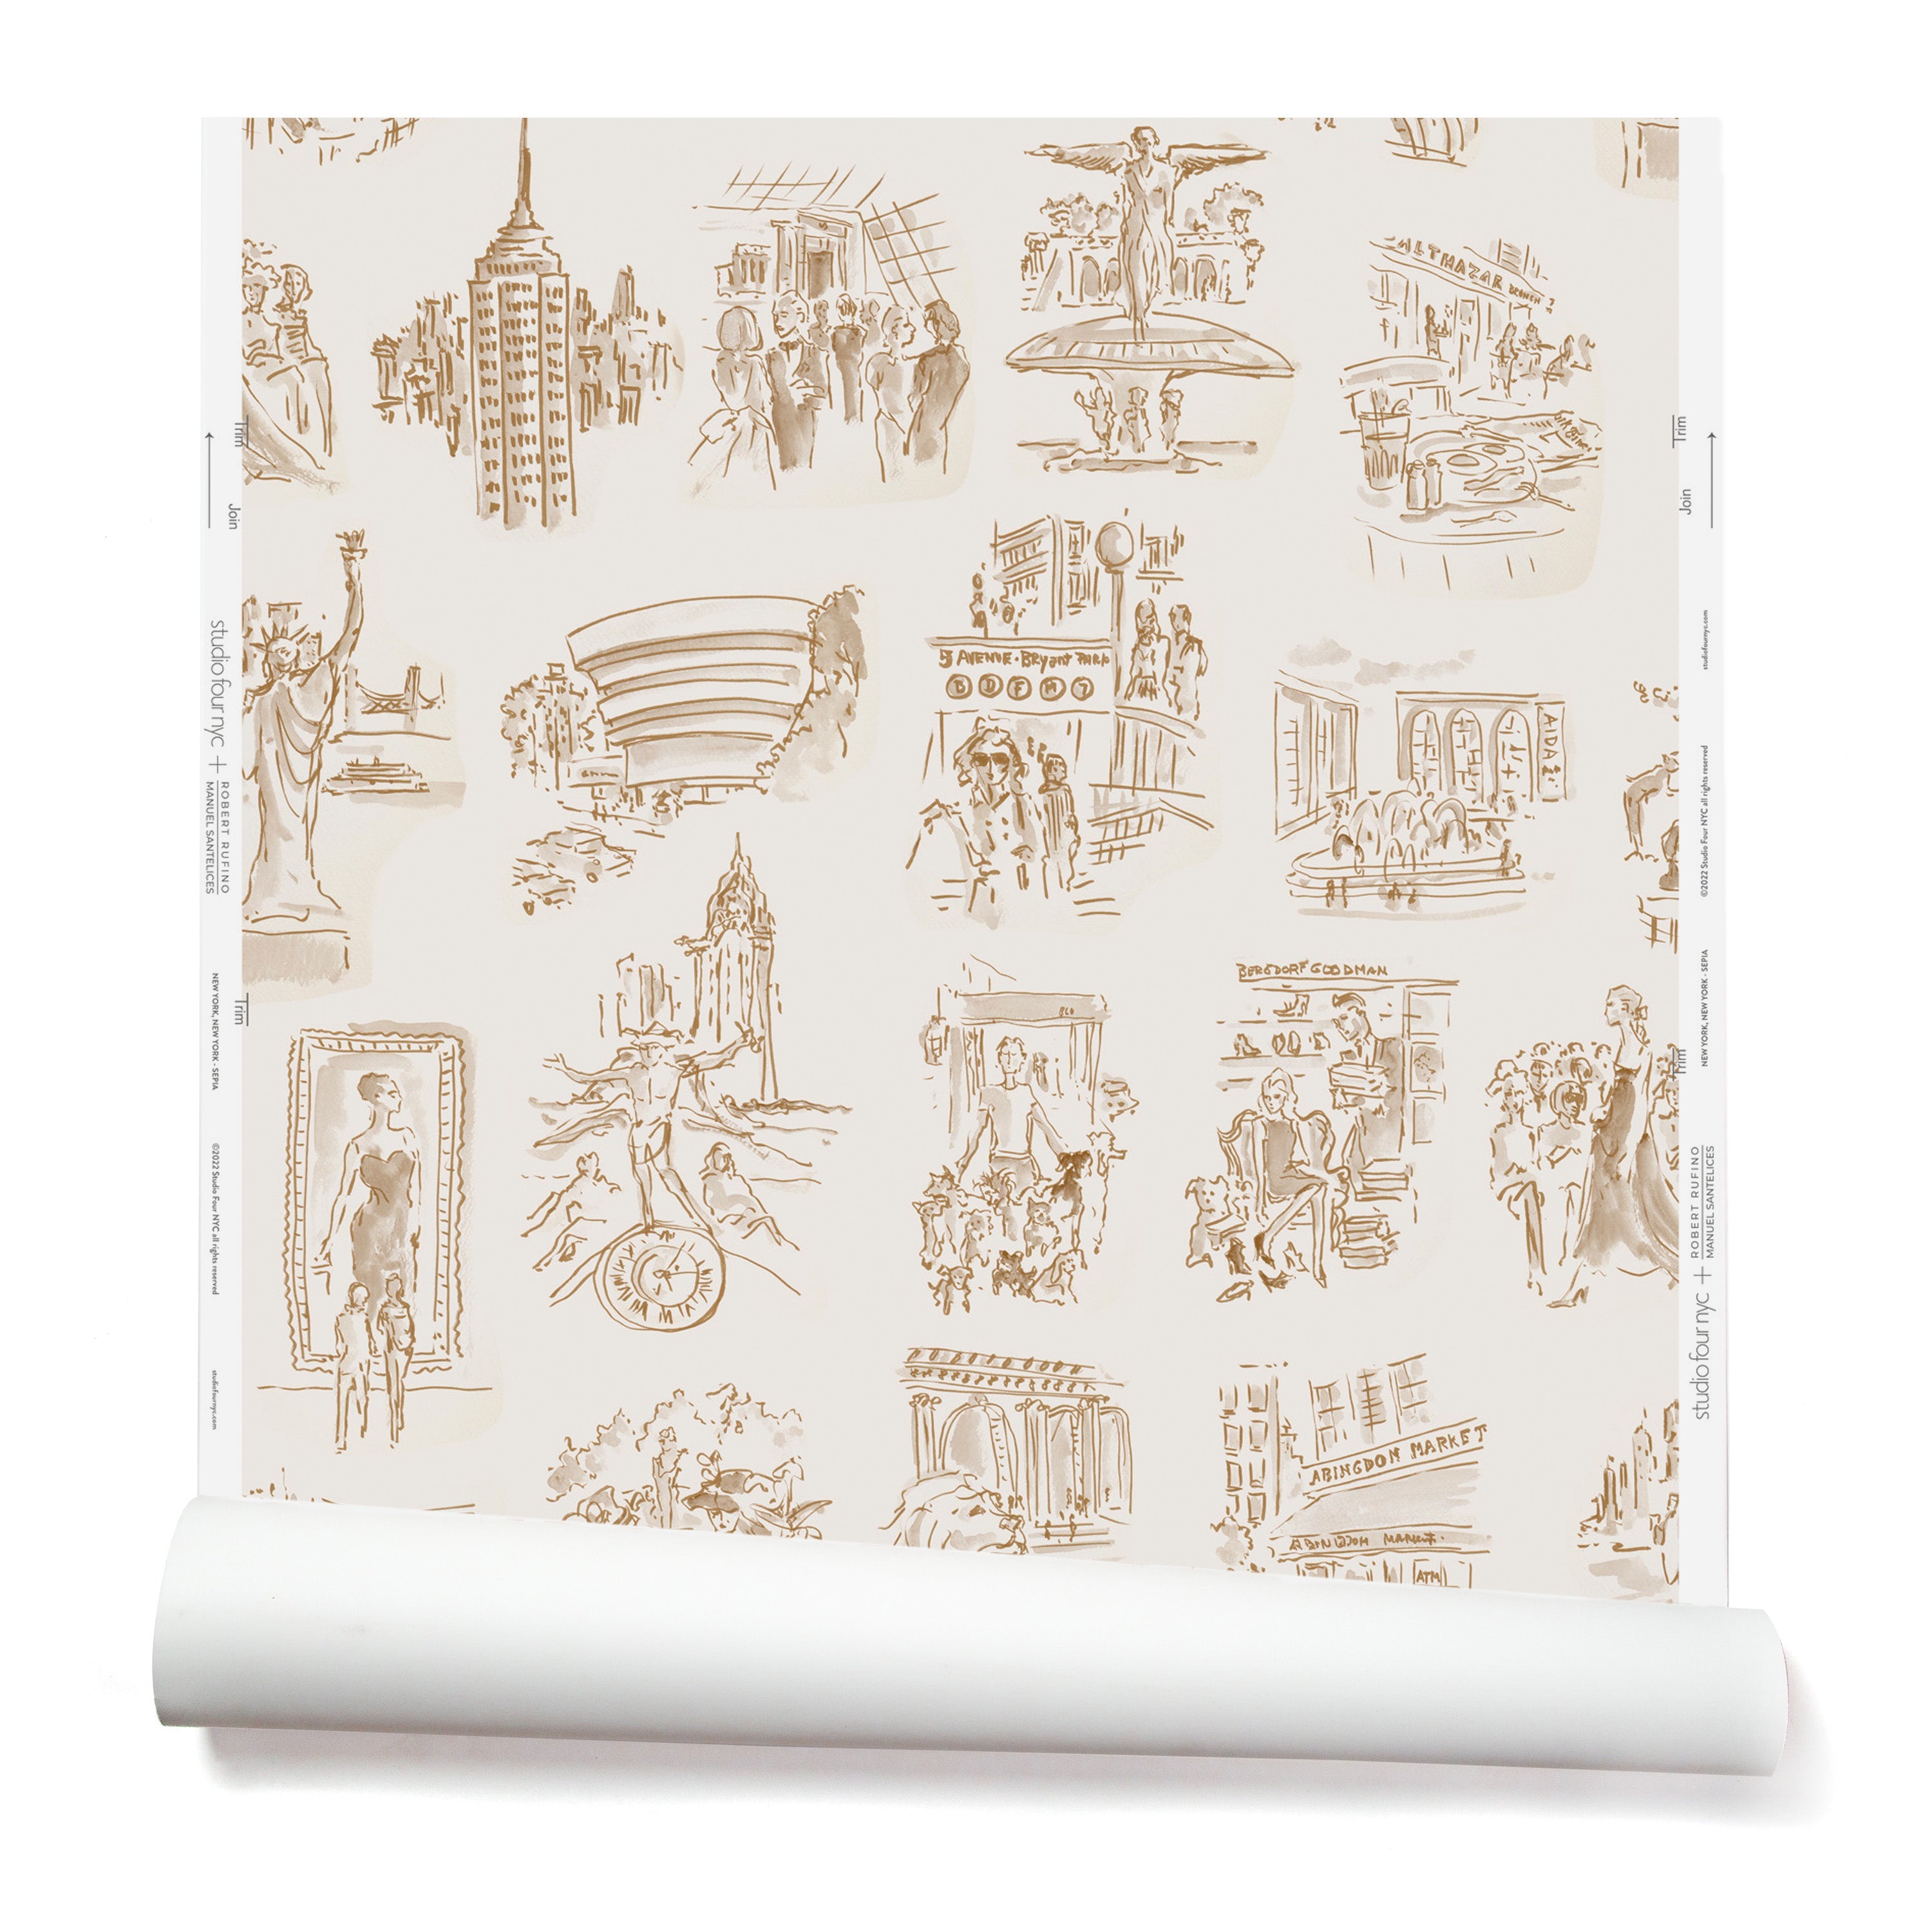 Partially unrolled wallpaper with sepia tone hand-drawn illustrations of New York City landmarks on a beige background.